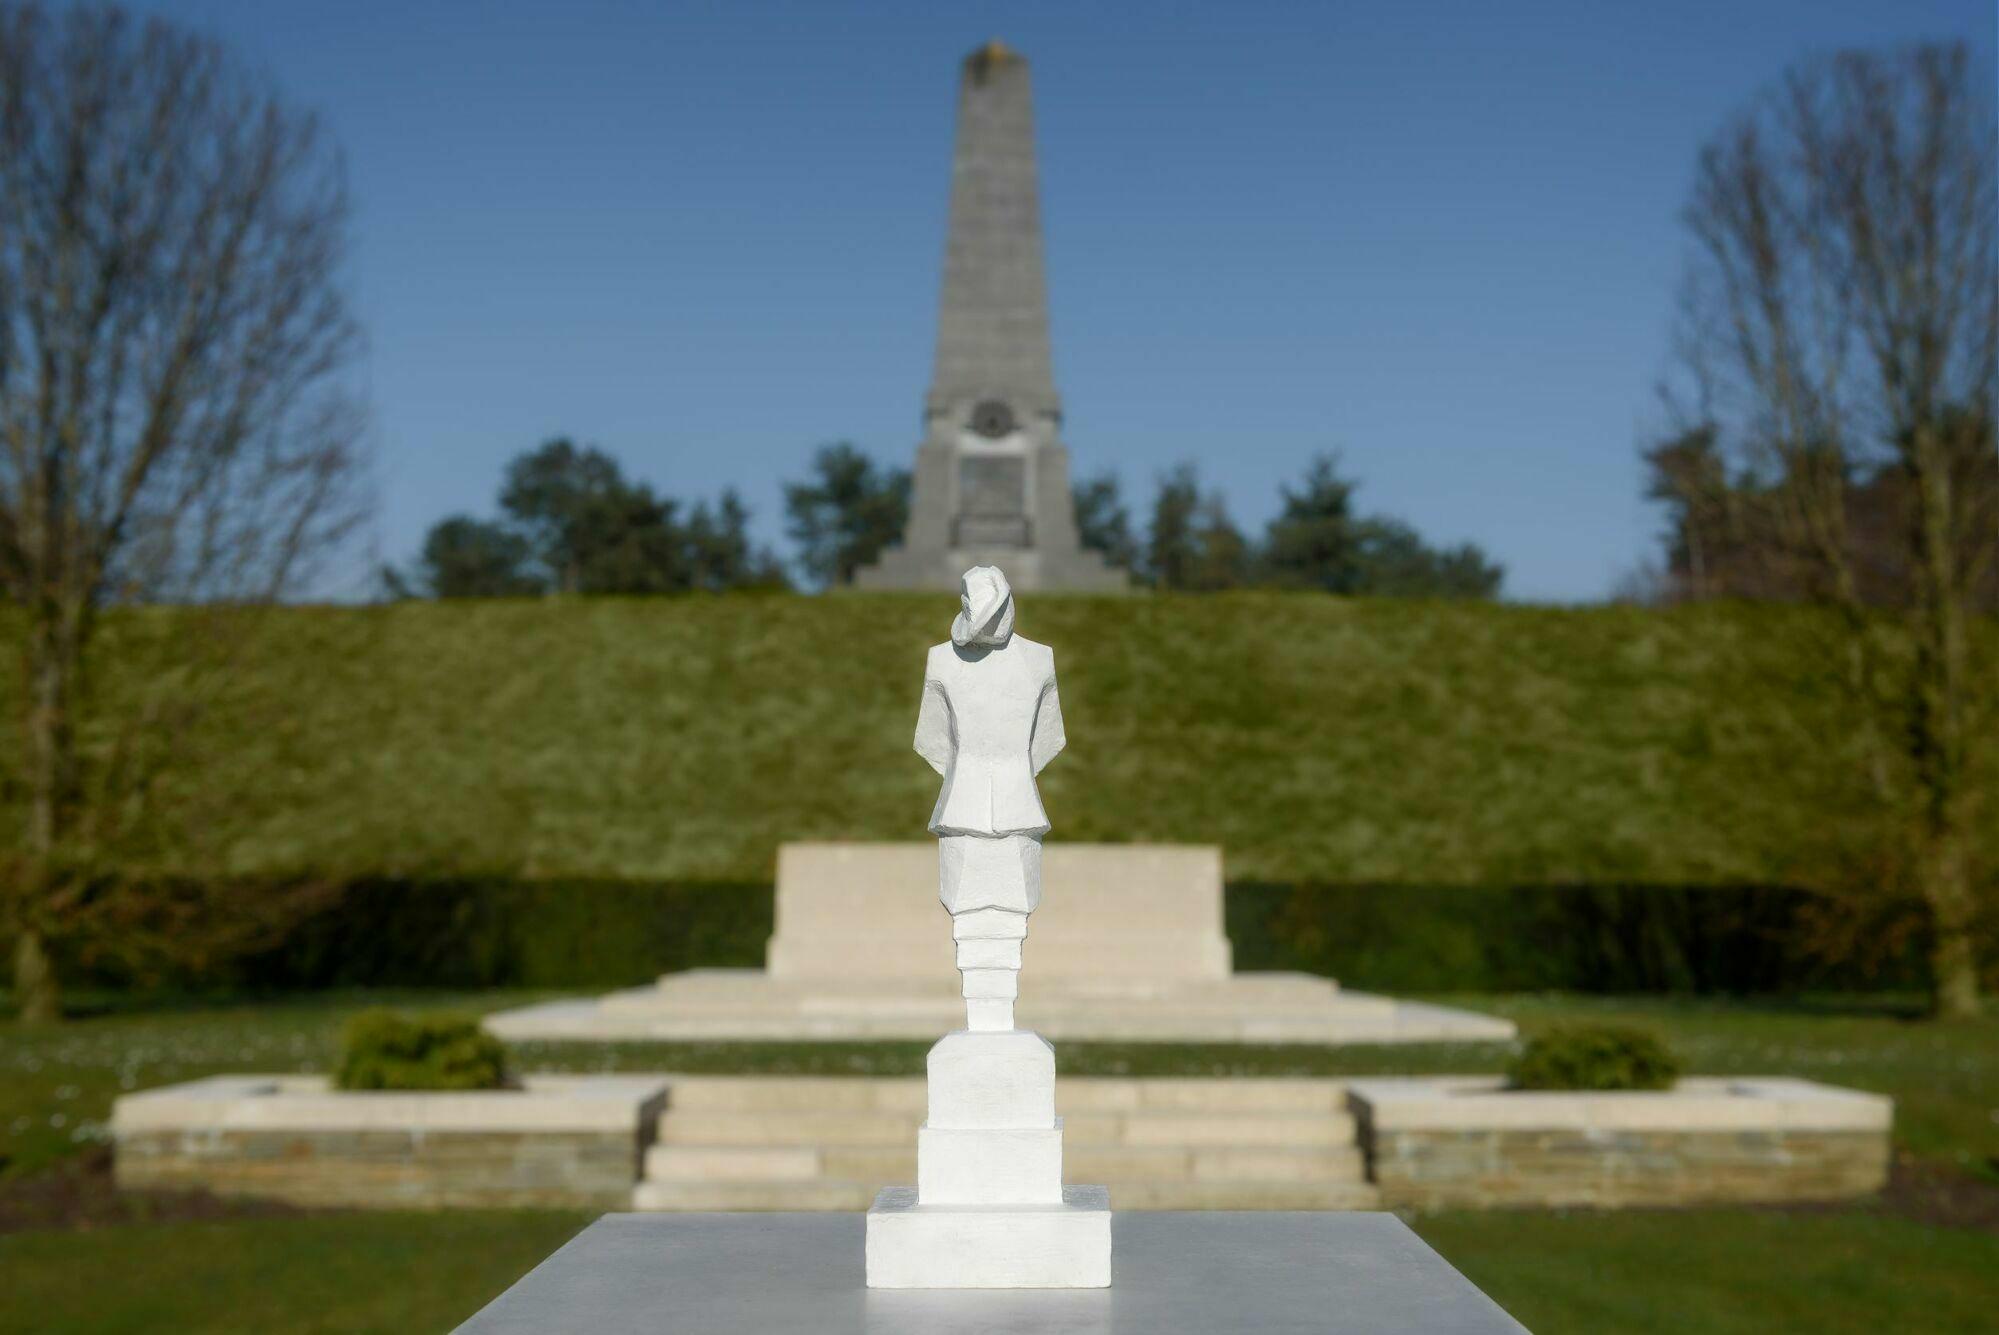 CWGC uncovers unique and touching piece of art trophy for Gent-Wevelgem in Falnders' fields 2022